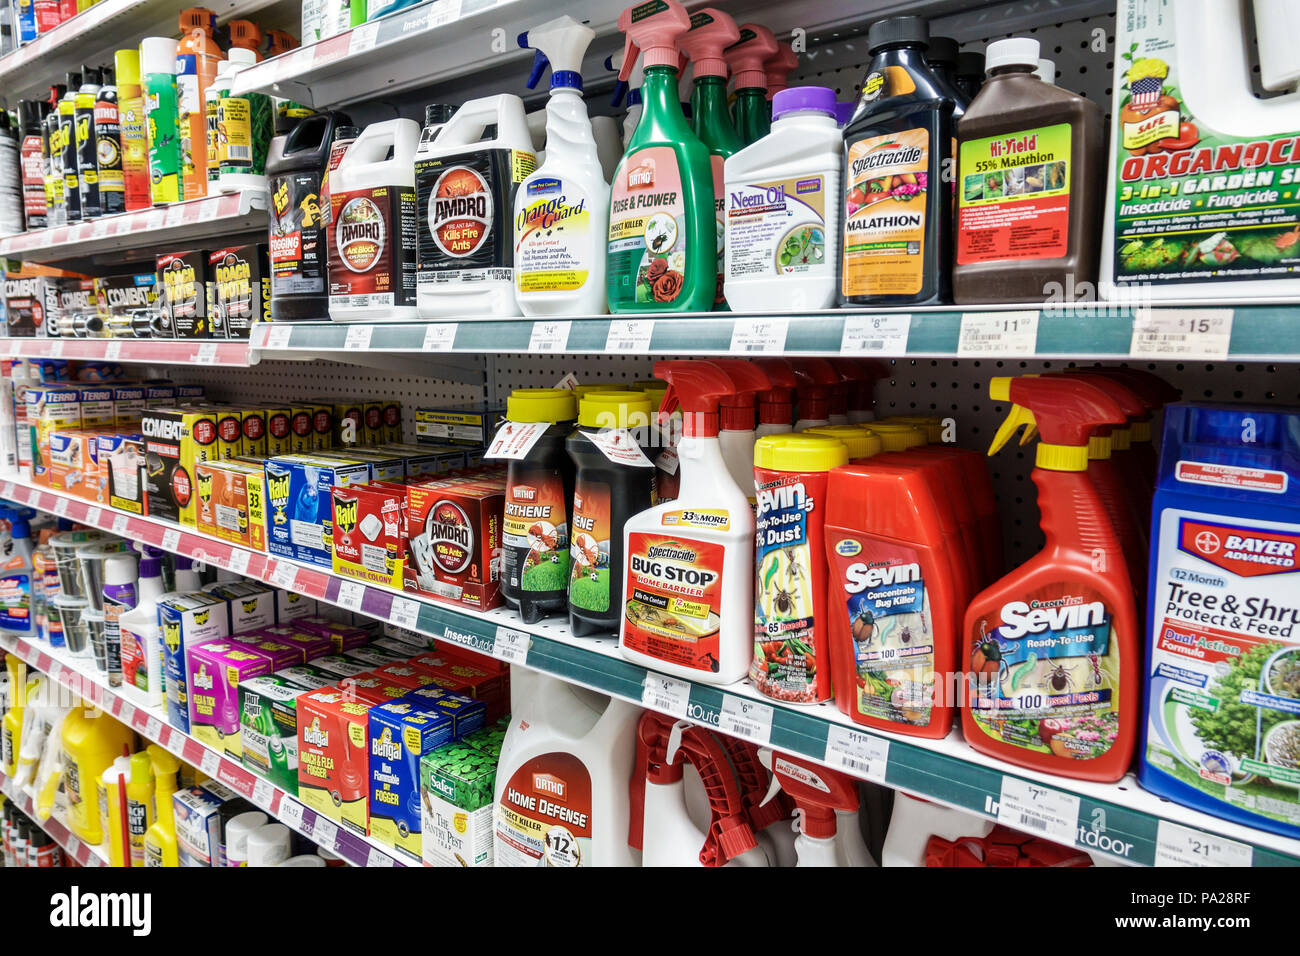 Orlando Florida,Ace Hardware,pesticides insecticides poisons insect sprays,Ortho,Spectracide,Sevin,shelves display sale,interior inside,FL171029122 Stock Photo